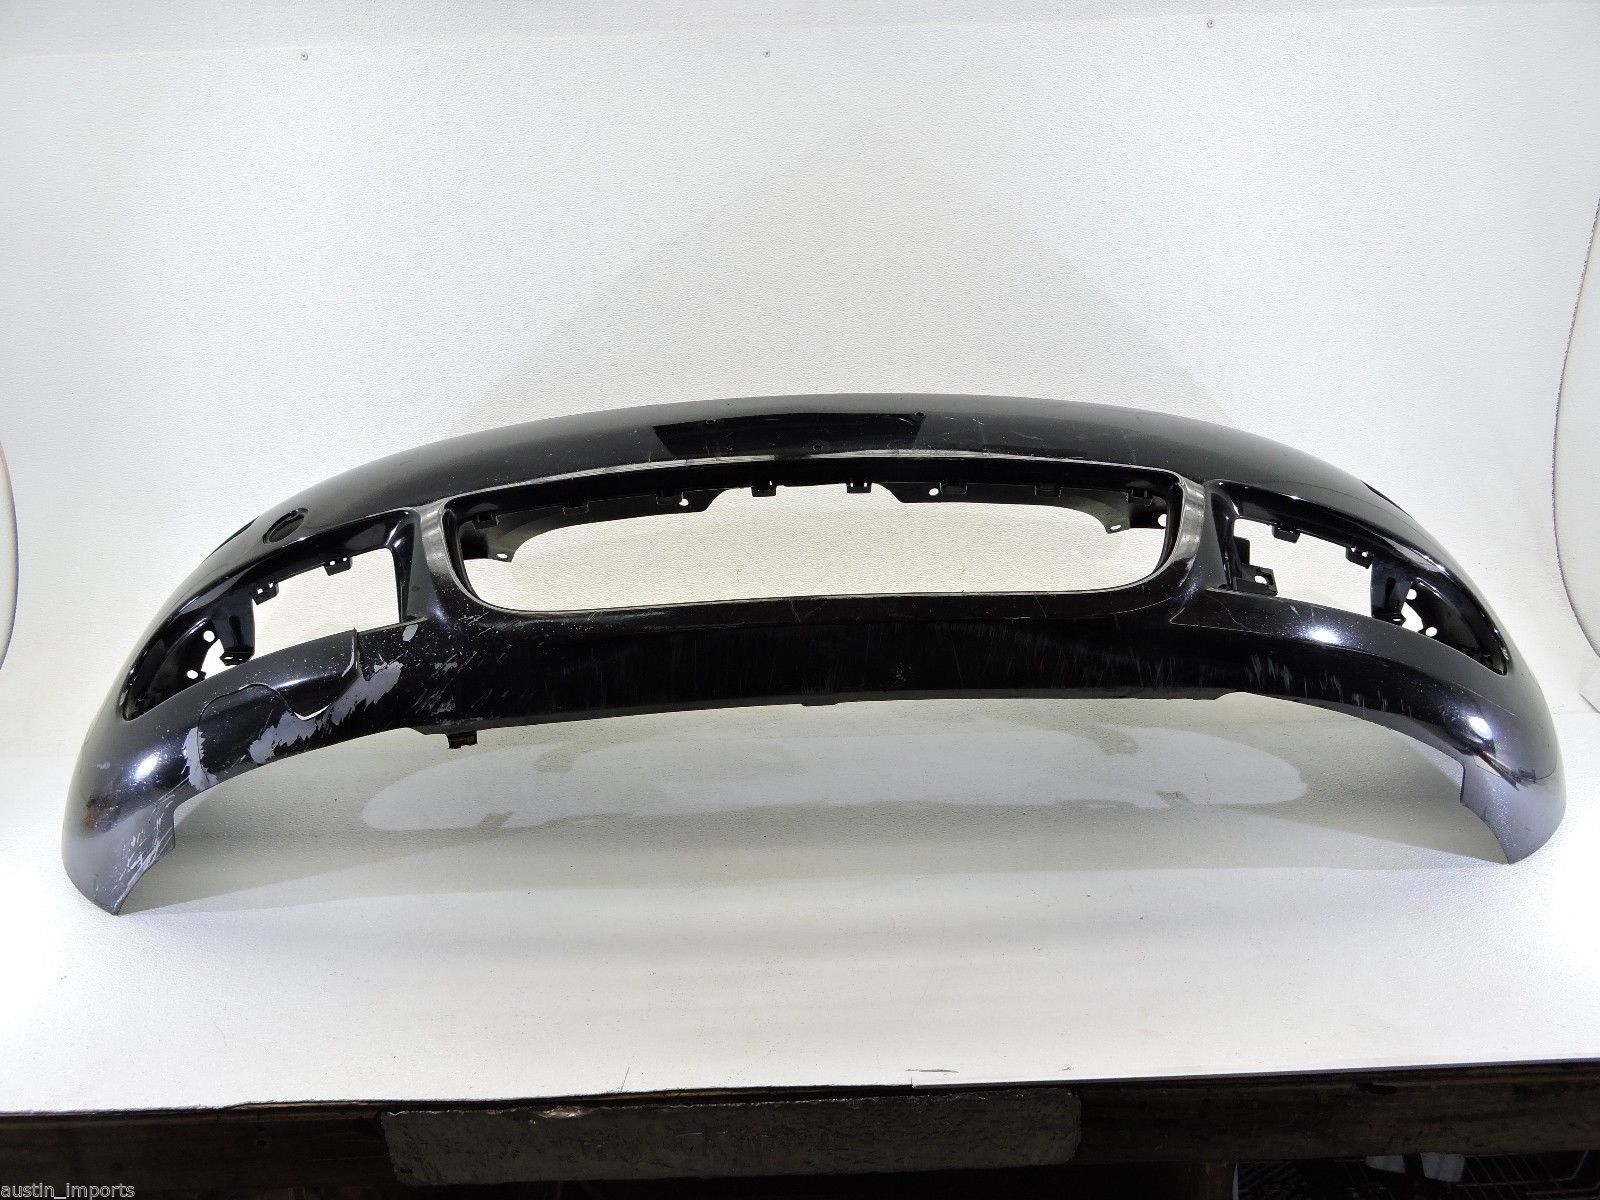 Primary image for VW BEETLE TDI AUTO FRONT BUMPER COVER FACTORY OEM -JB1 FS